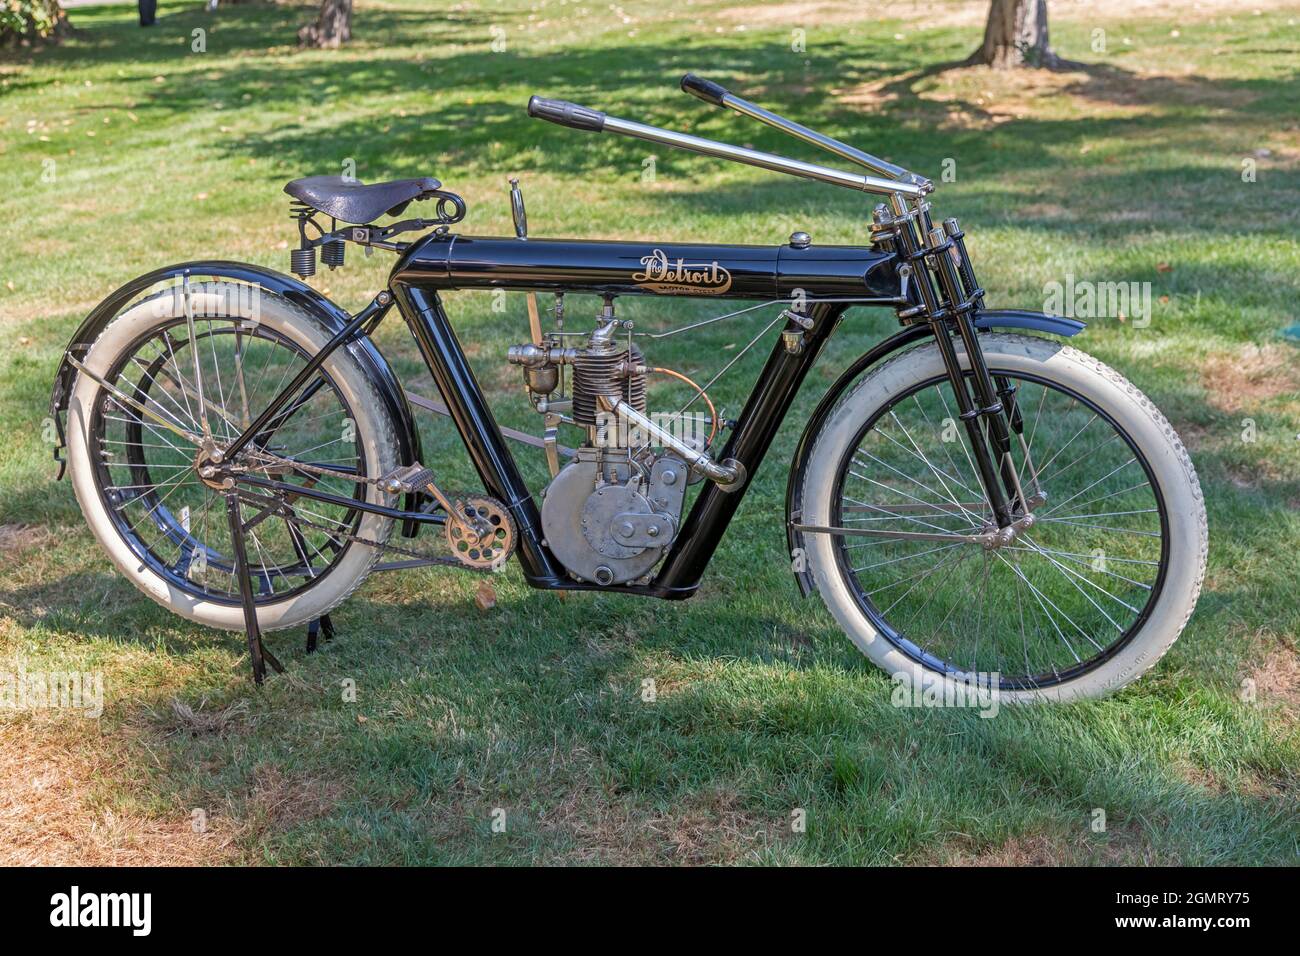 Grosse Pointe Shores, Michigan - The 1911 Detroit Single motorcycle at the Eyes on Design auto show. Stock Photo